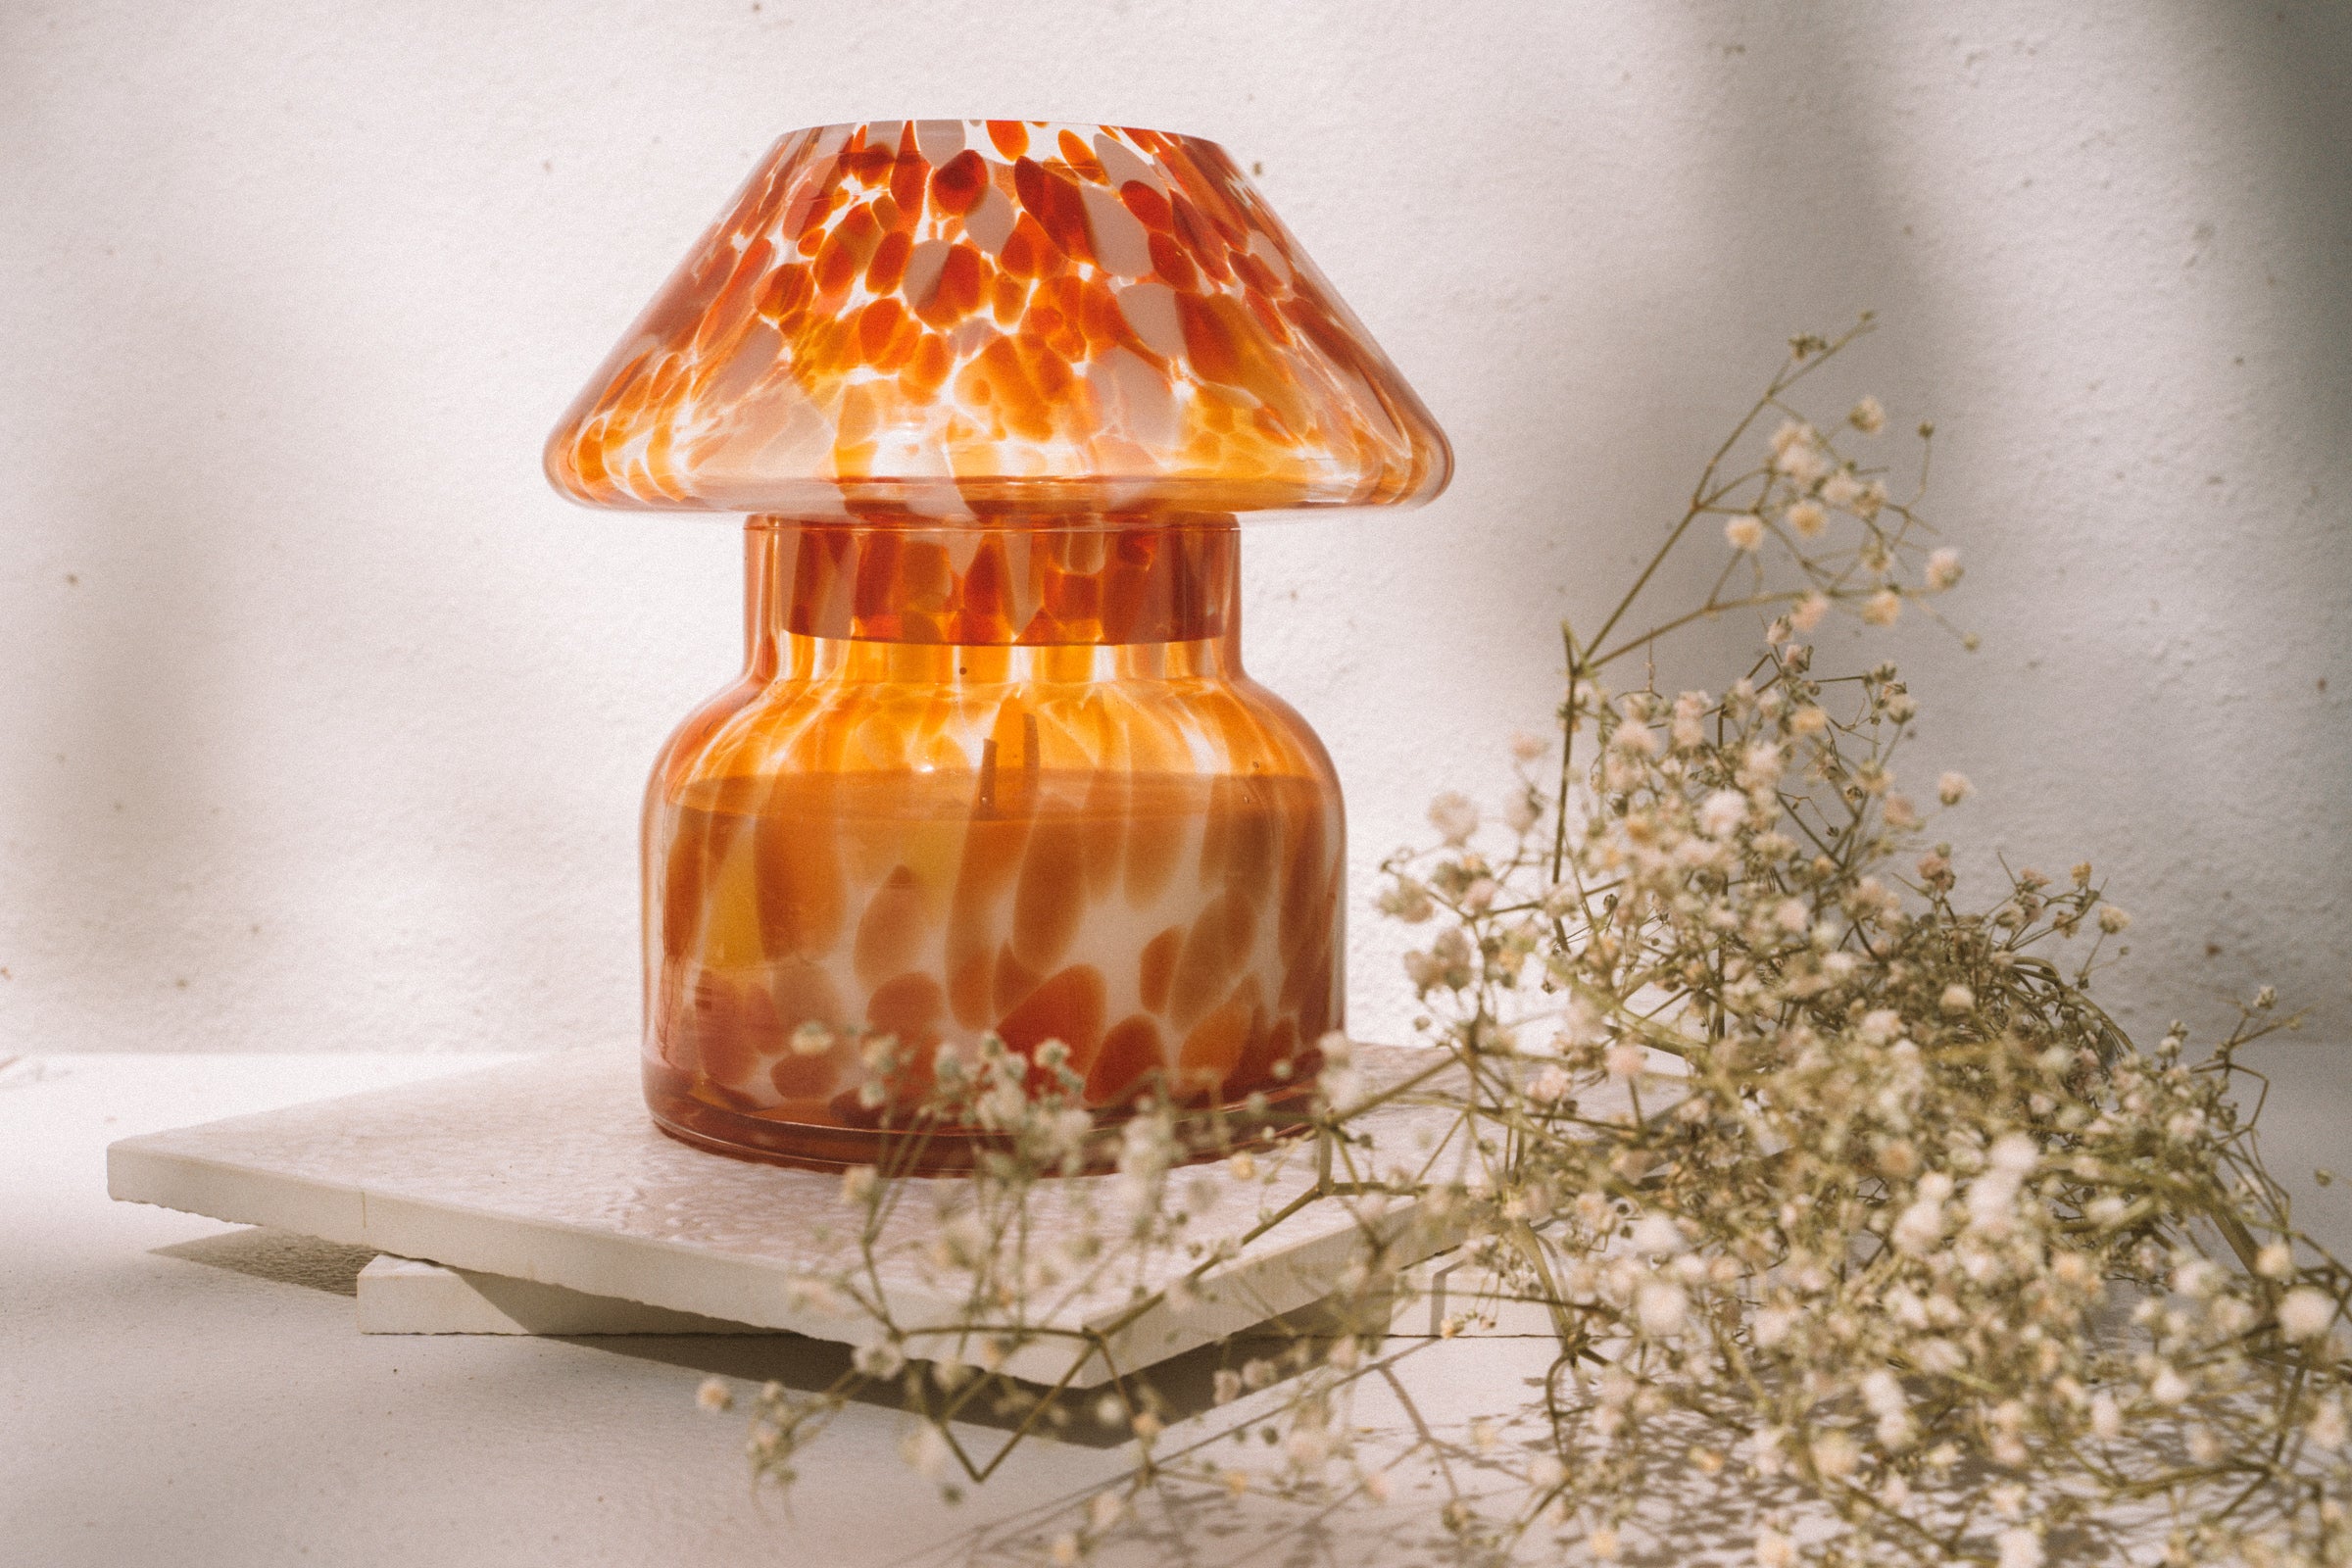 Mushroom candle lamp with red, orange and white spots on clear glass. Retro lamp is filled with 100% soy wax placed one white tiles with dried flowers.